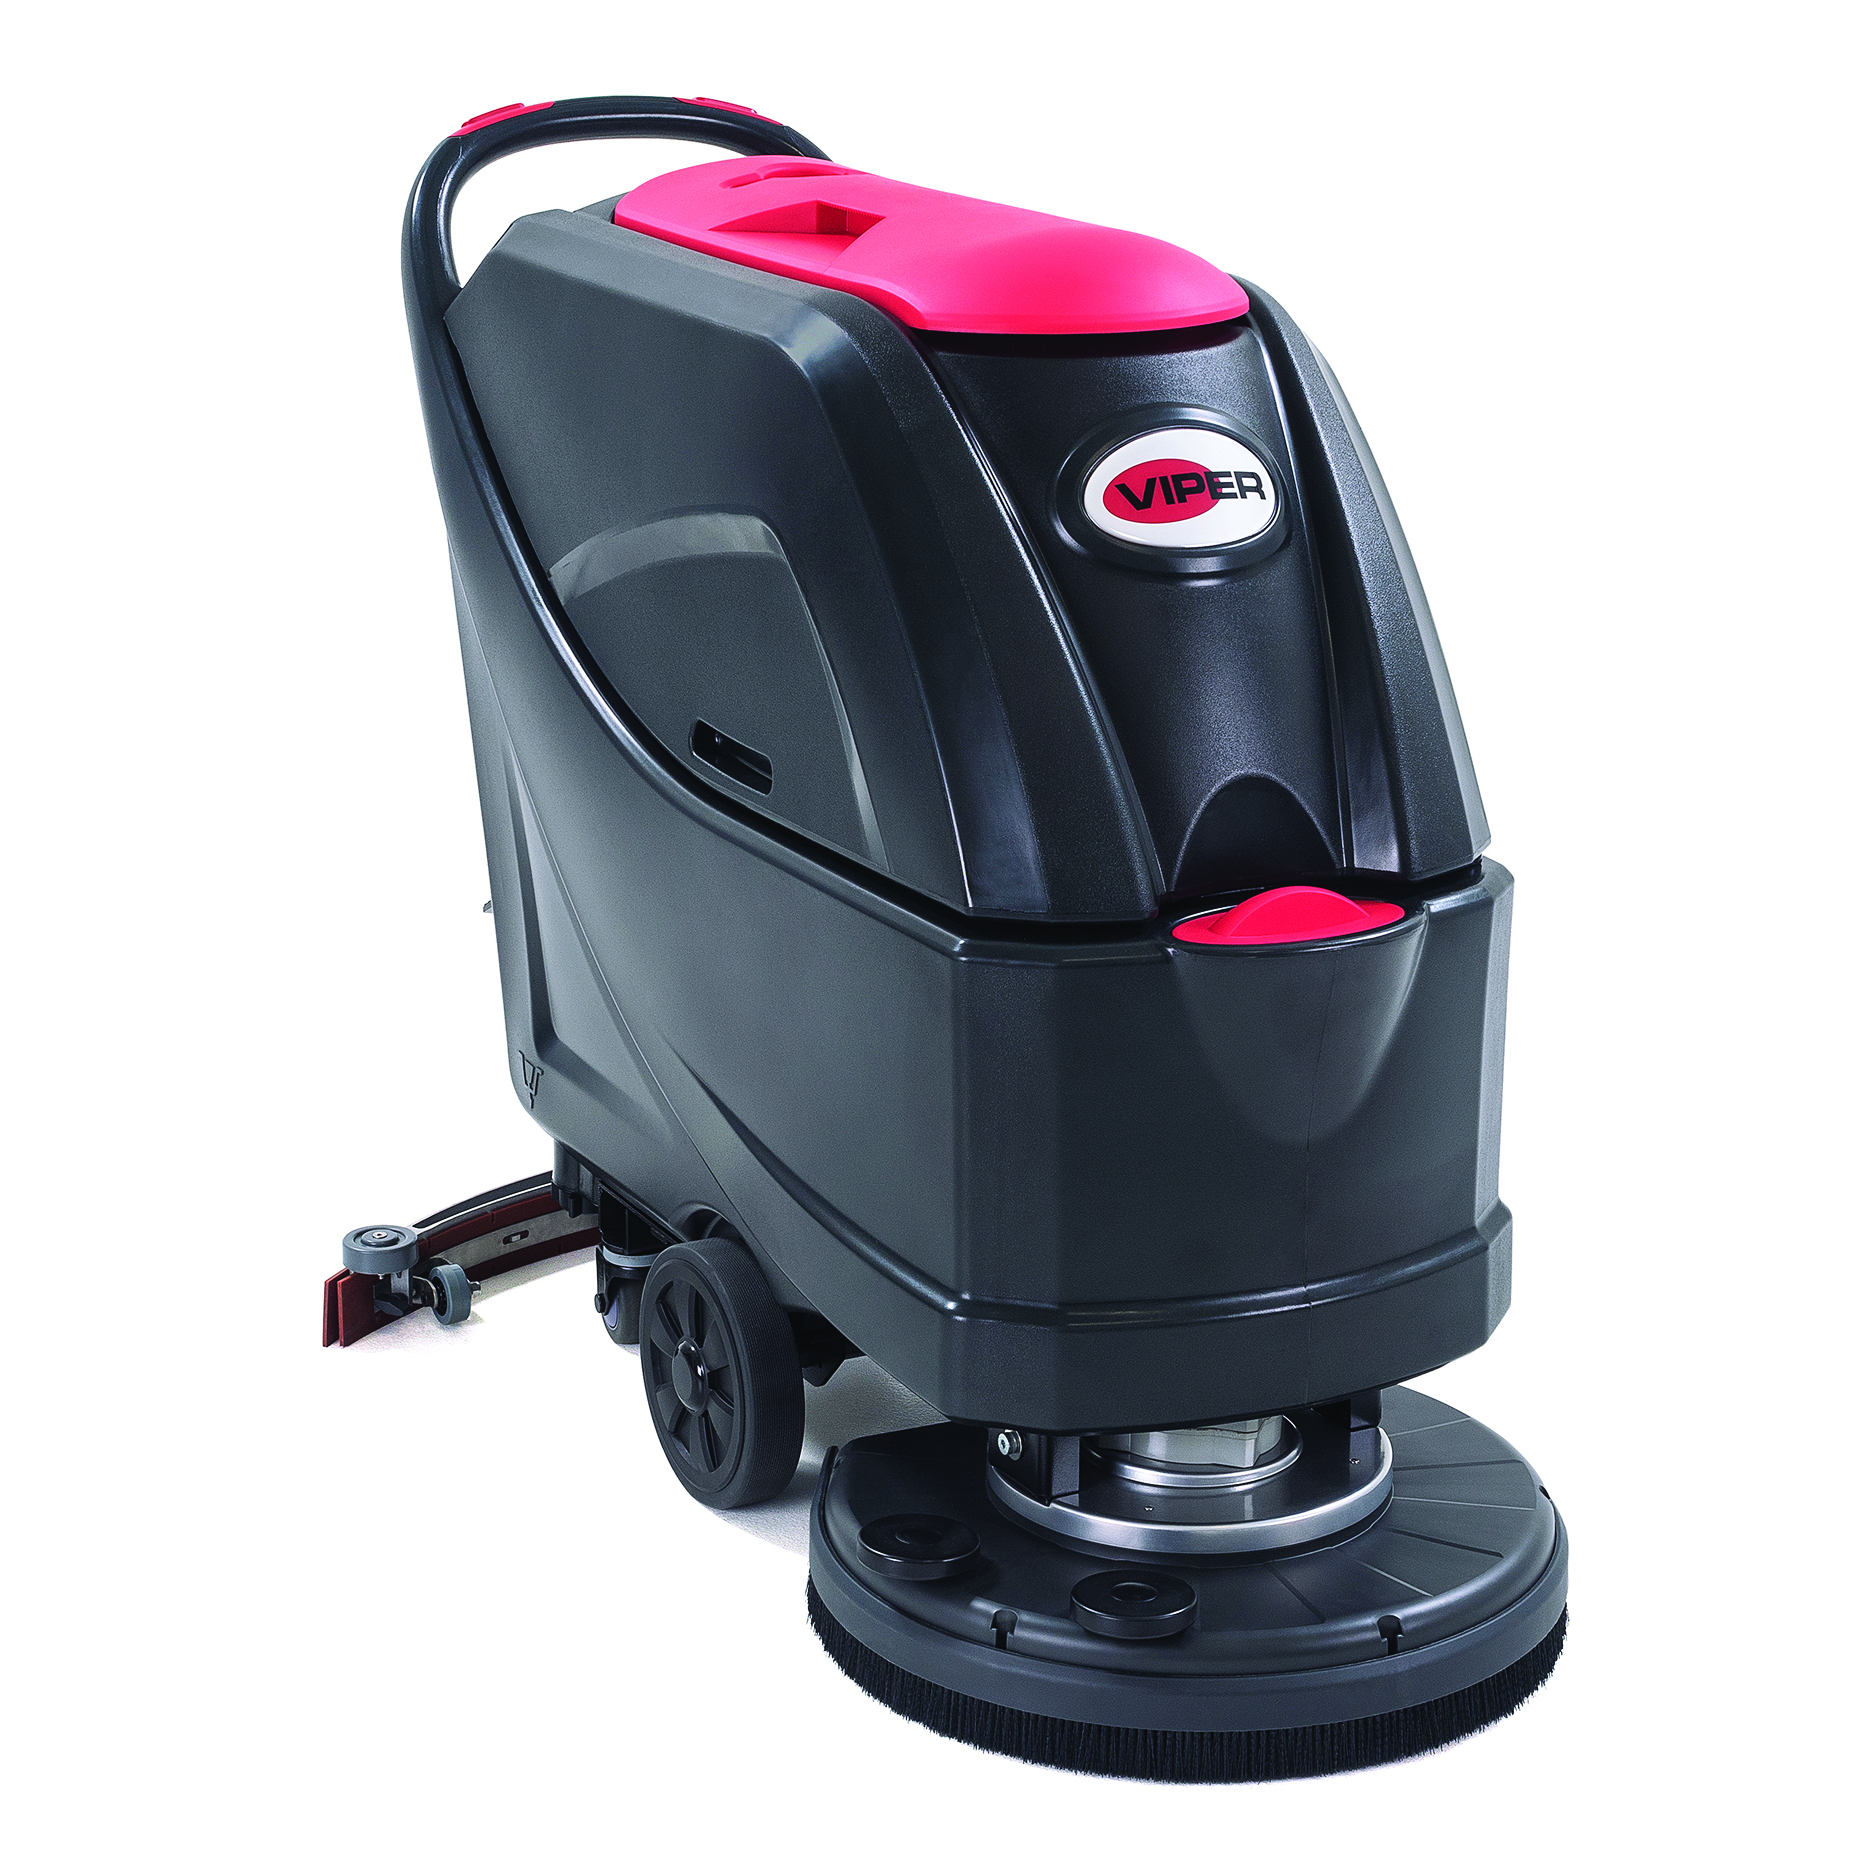 AS5160T Viper 20&quot; Auto
Scrubber 16 Gallon, Traction
Drive, Pad Driver, 31&quot;
Squeegee Assembly, 10 Amp
Charge, 105 a/h WET Batteries